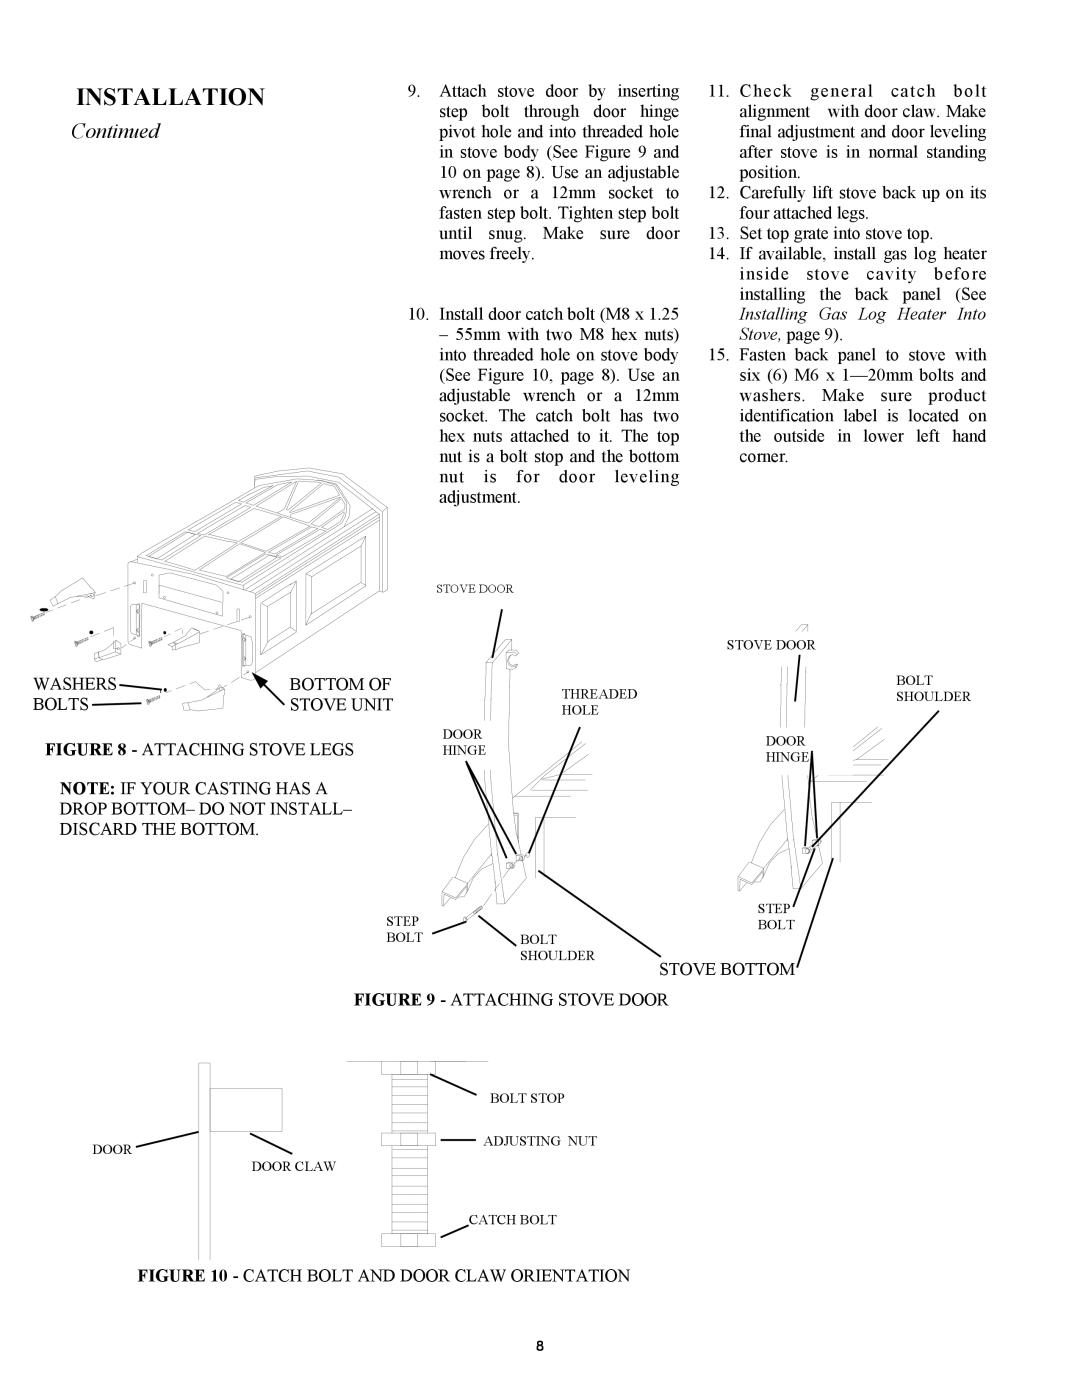 New Buck Corporation GAS STOVE HEATER installation manual Continued, Install door catch bolt M8 